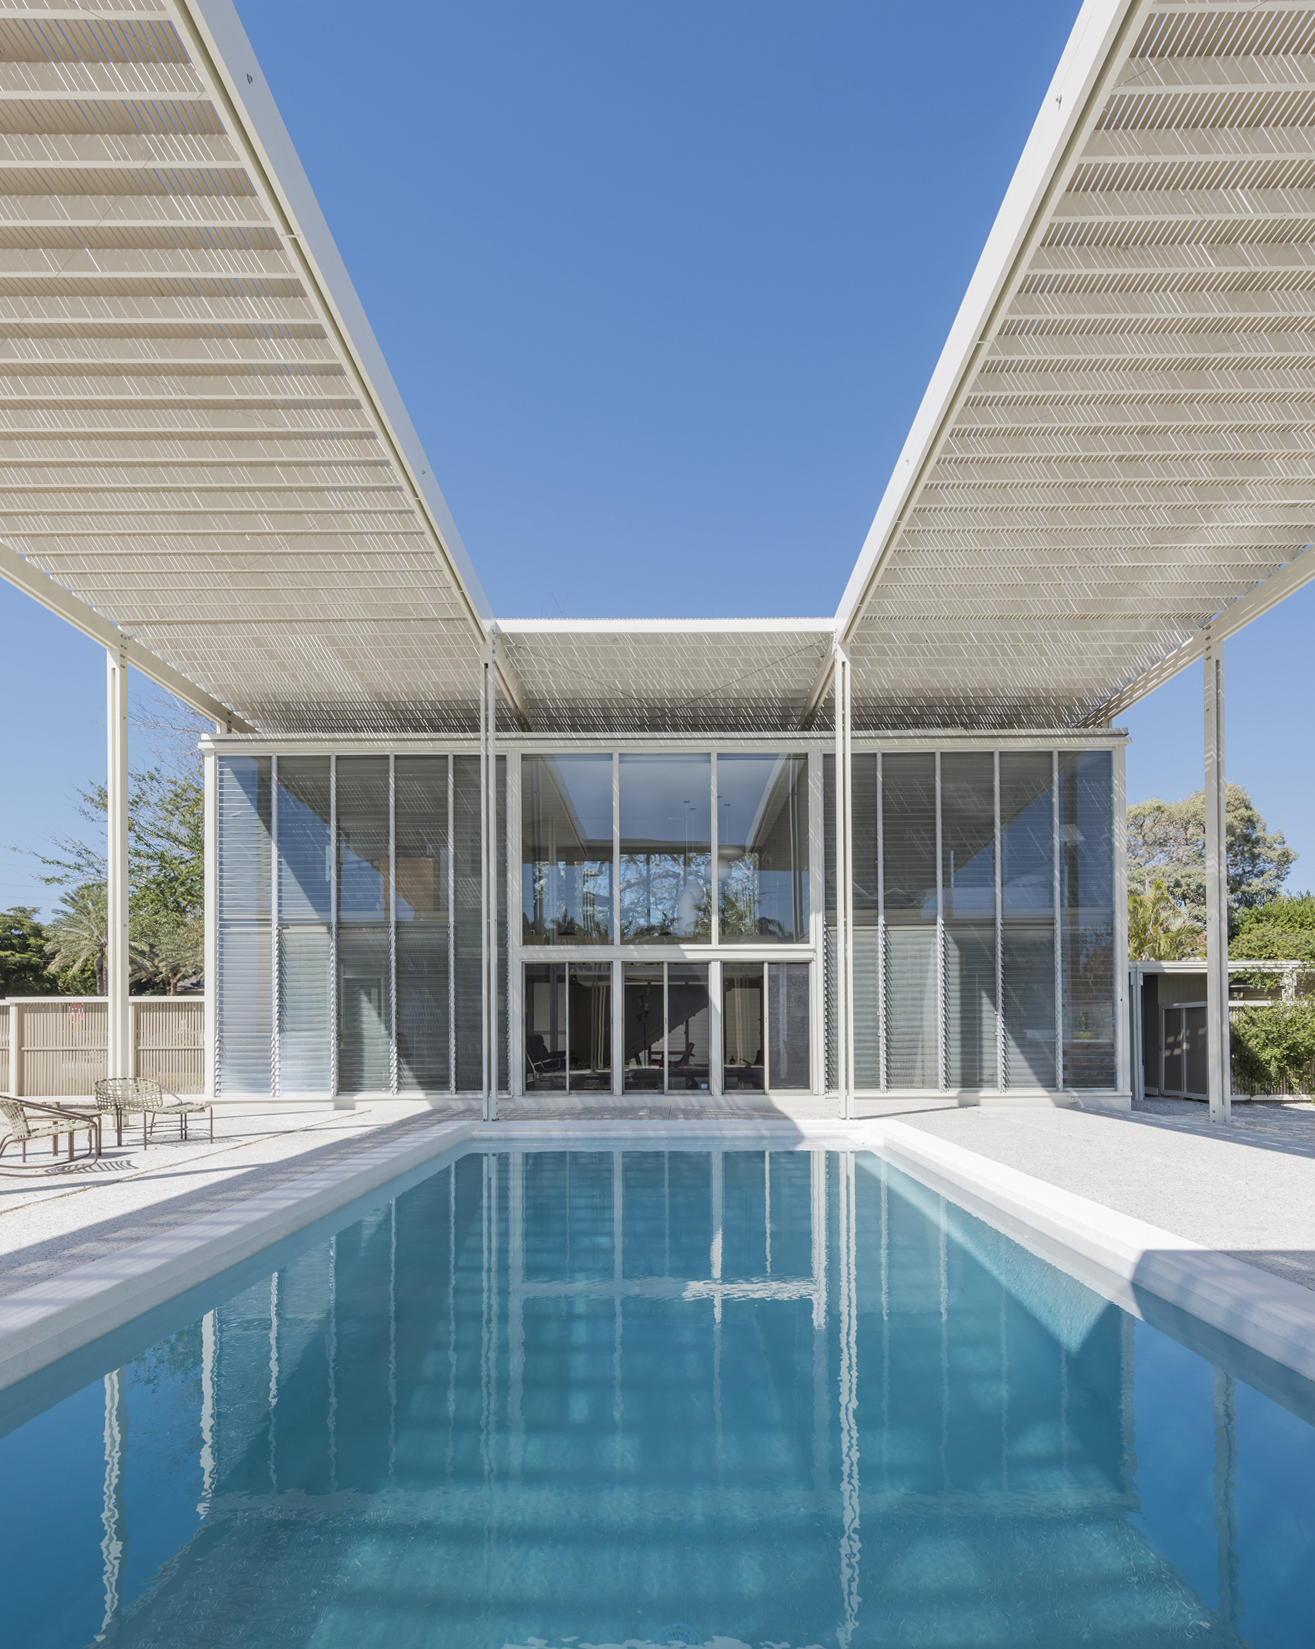 In 2015 a full umbrella over the Umbrella House pool was painstakingly rebuilt by Hall Architects. Courtesy image 